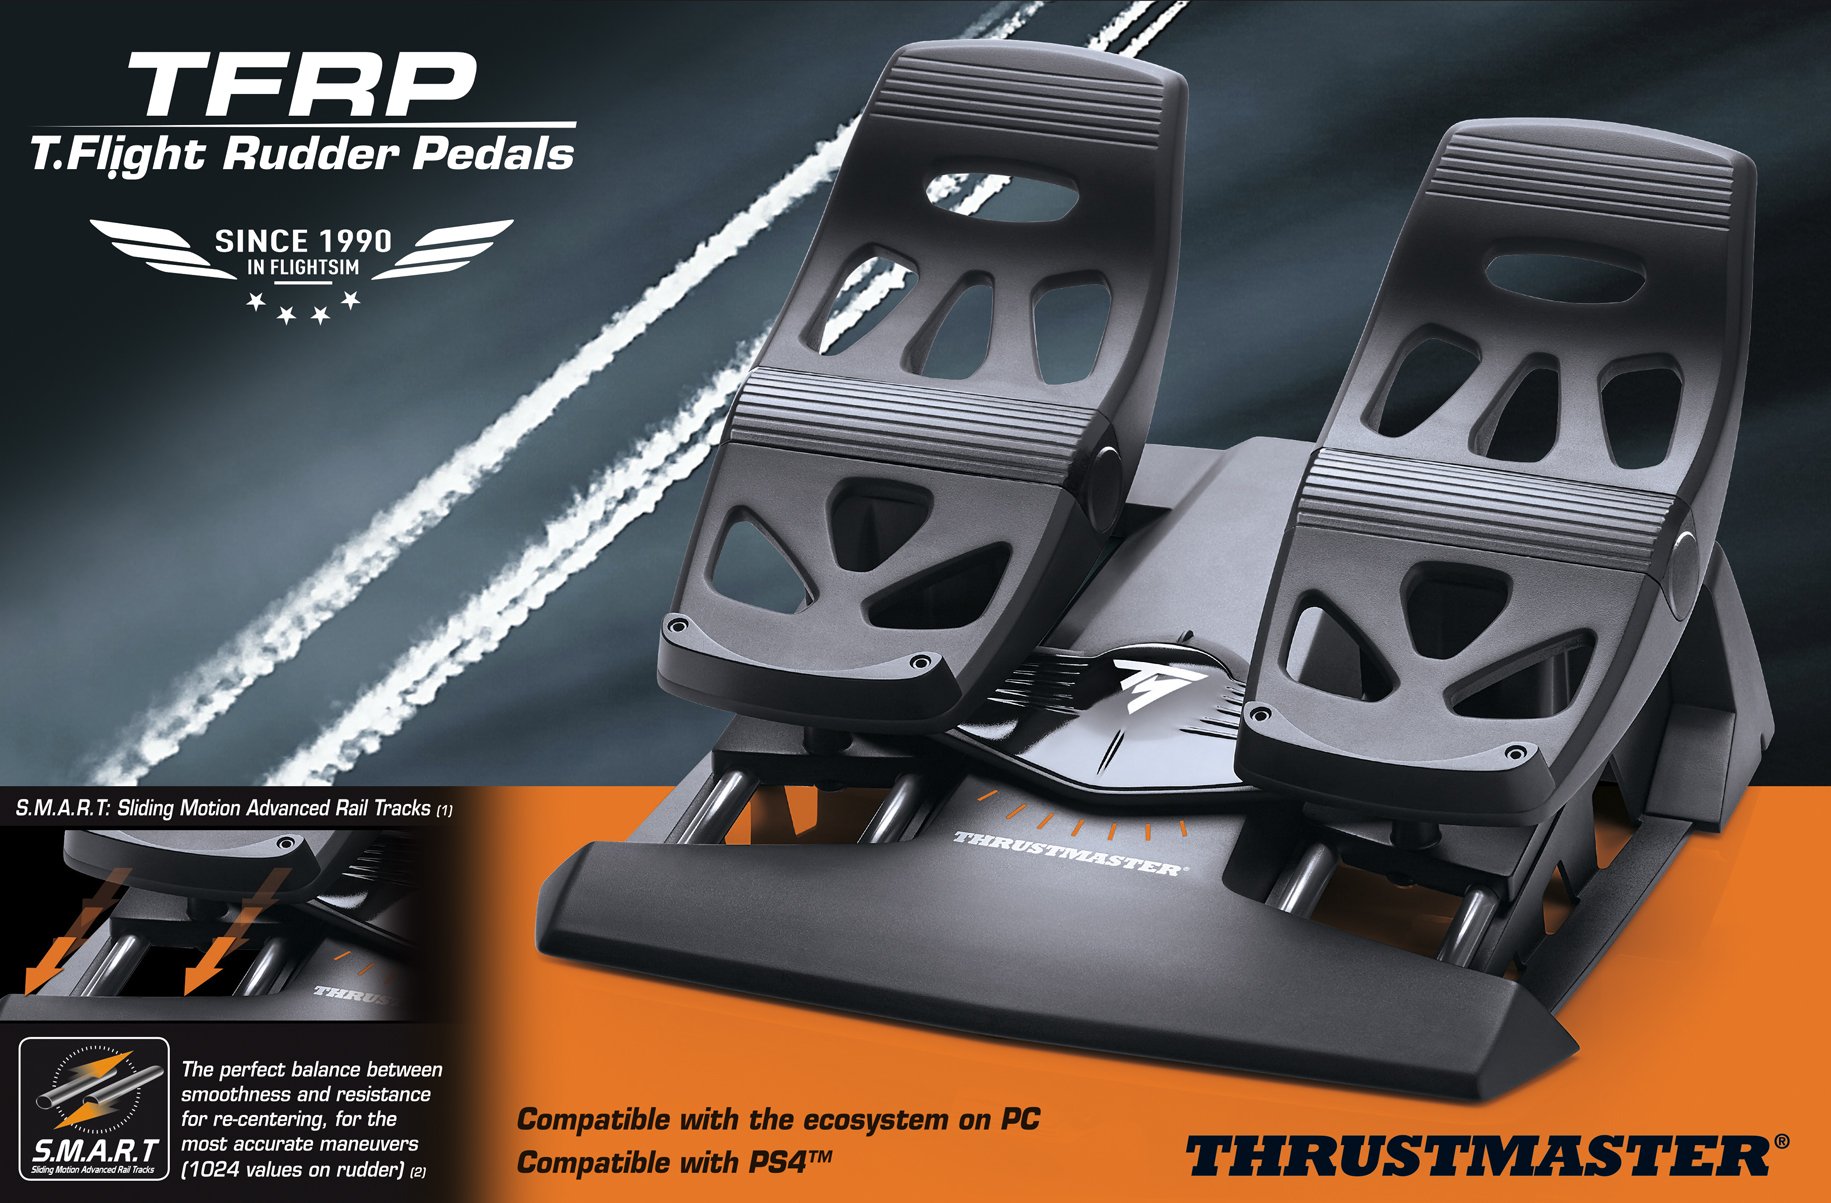 Thrustmaster Official on Twitter: "A review of our Thrustmaster Flight  Rudder Pedals (TFRP) from @3rdstrikegames: https://t.co/AW2FHbqBLb  https://t.co/4tTuEdcbrT" / Twitter